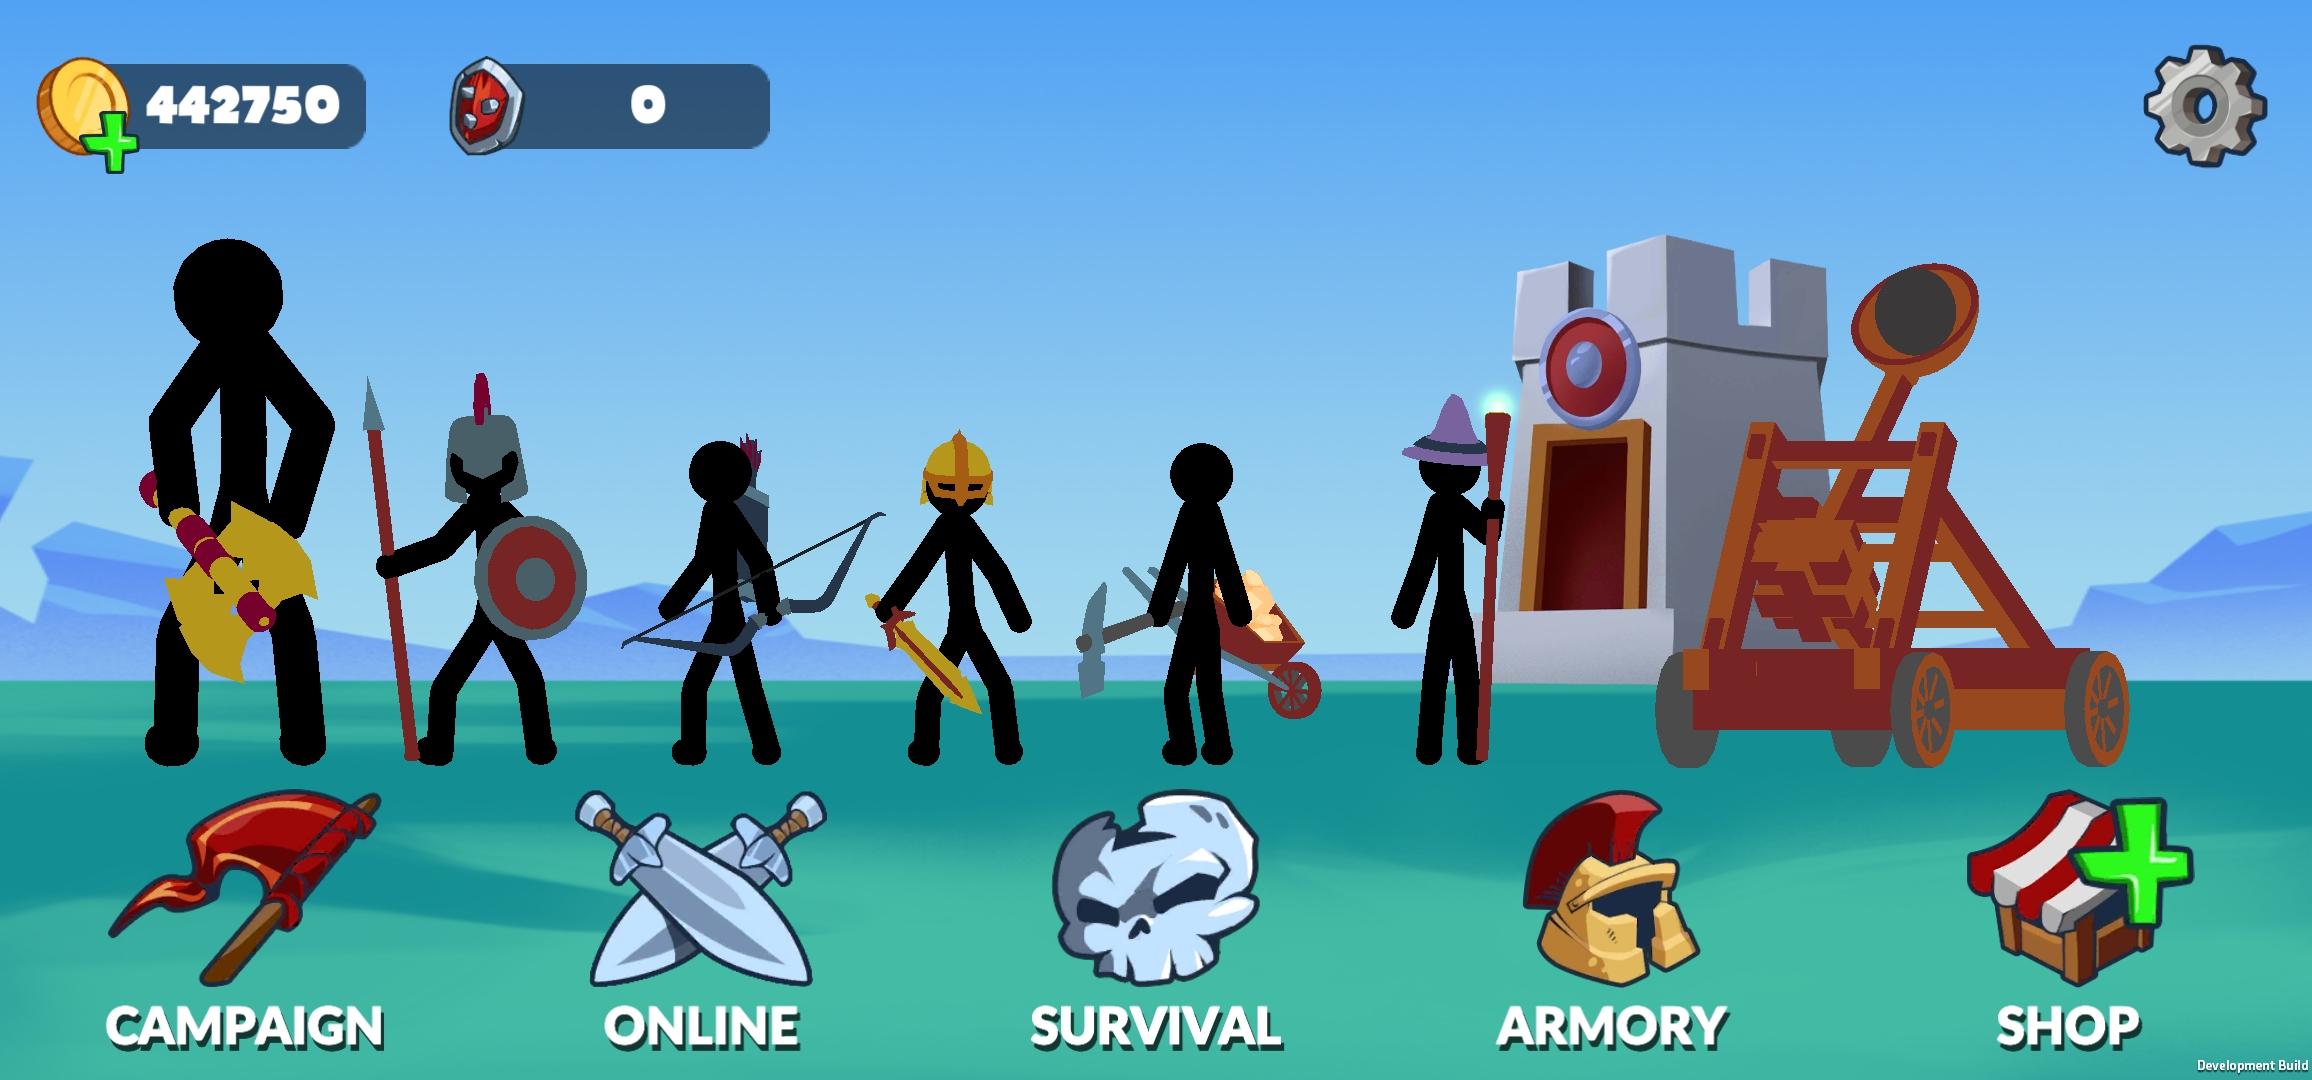 Play Stick Battle: Endless War Online for Free on PC & Mobile